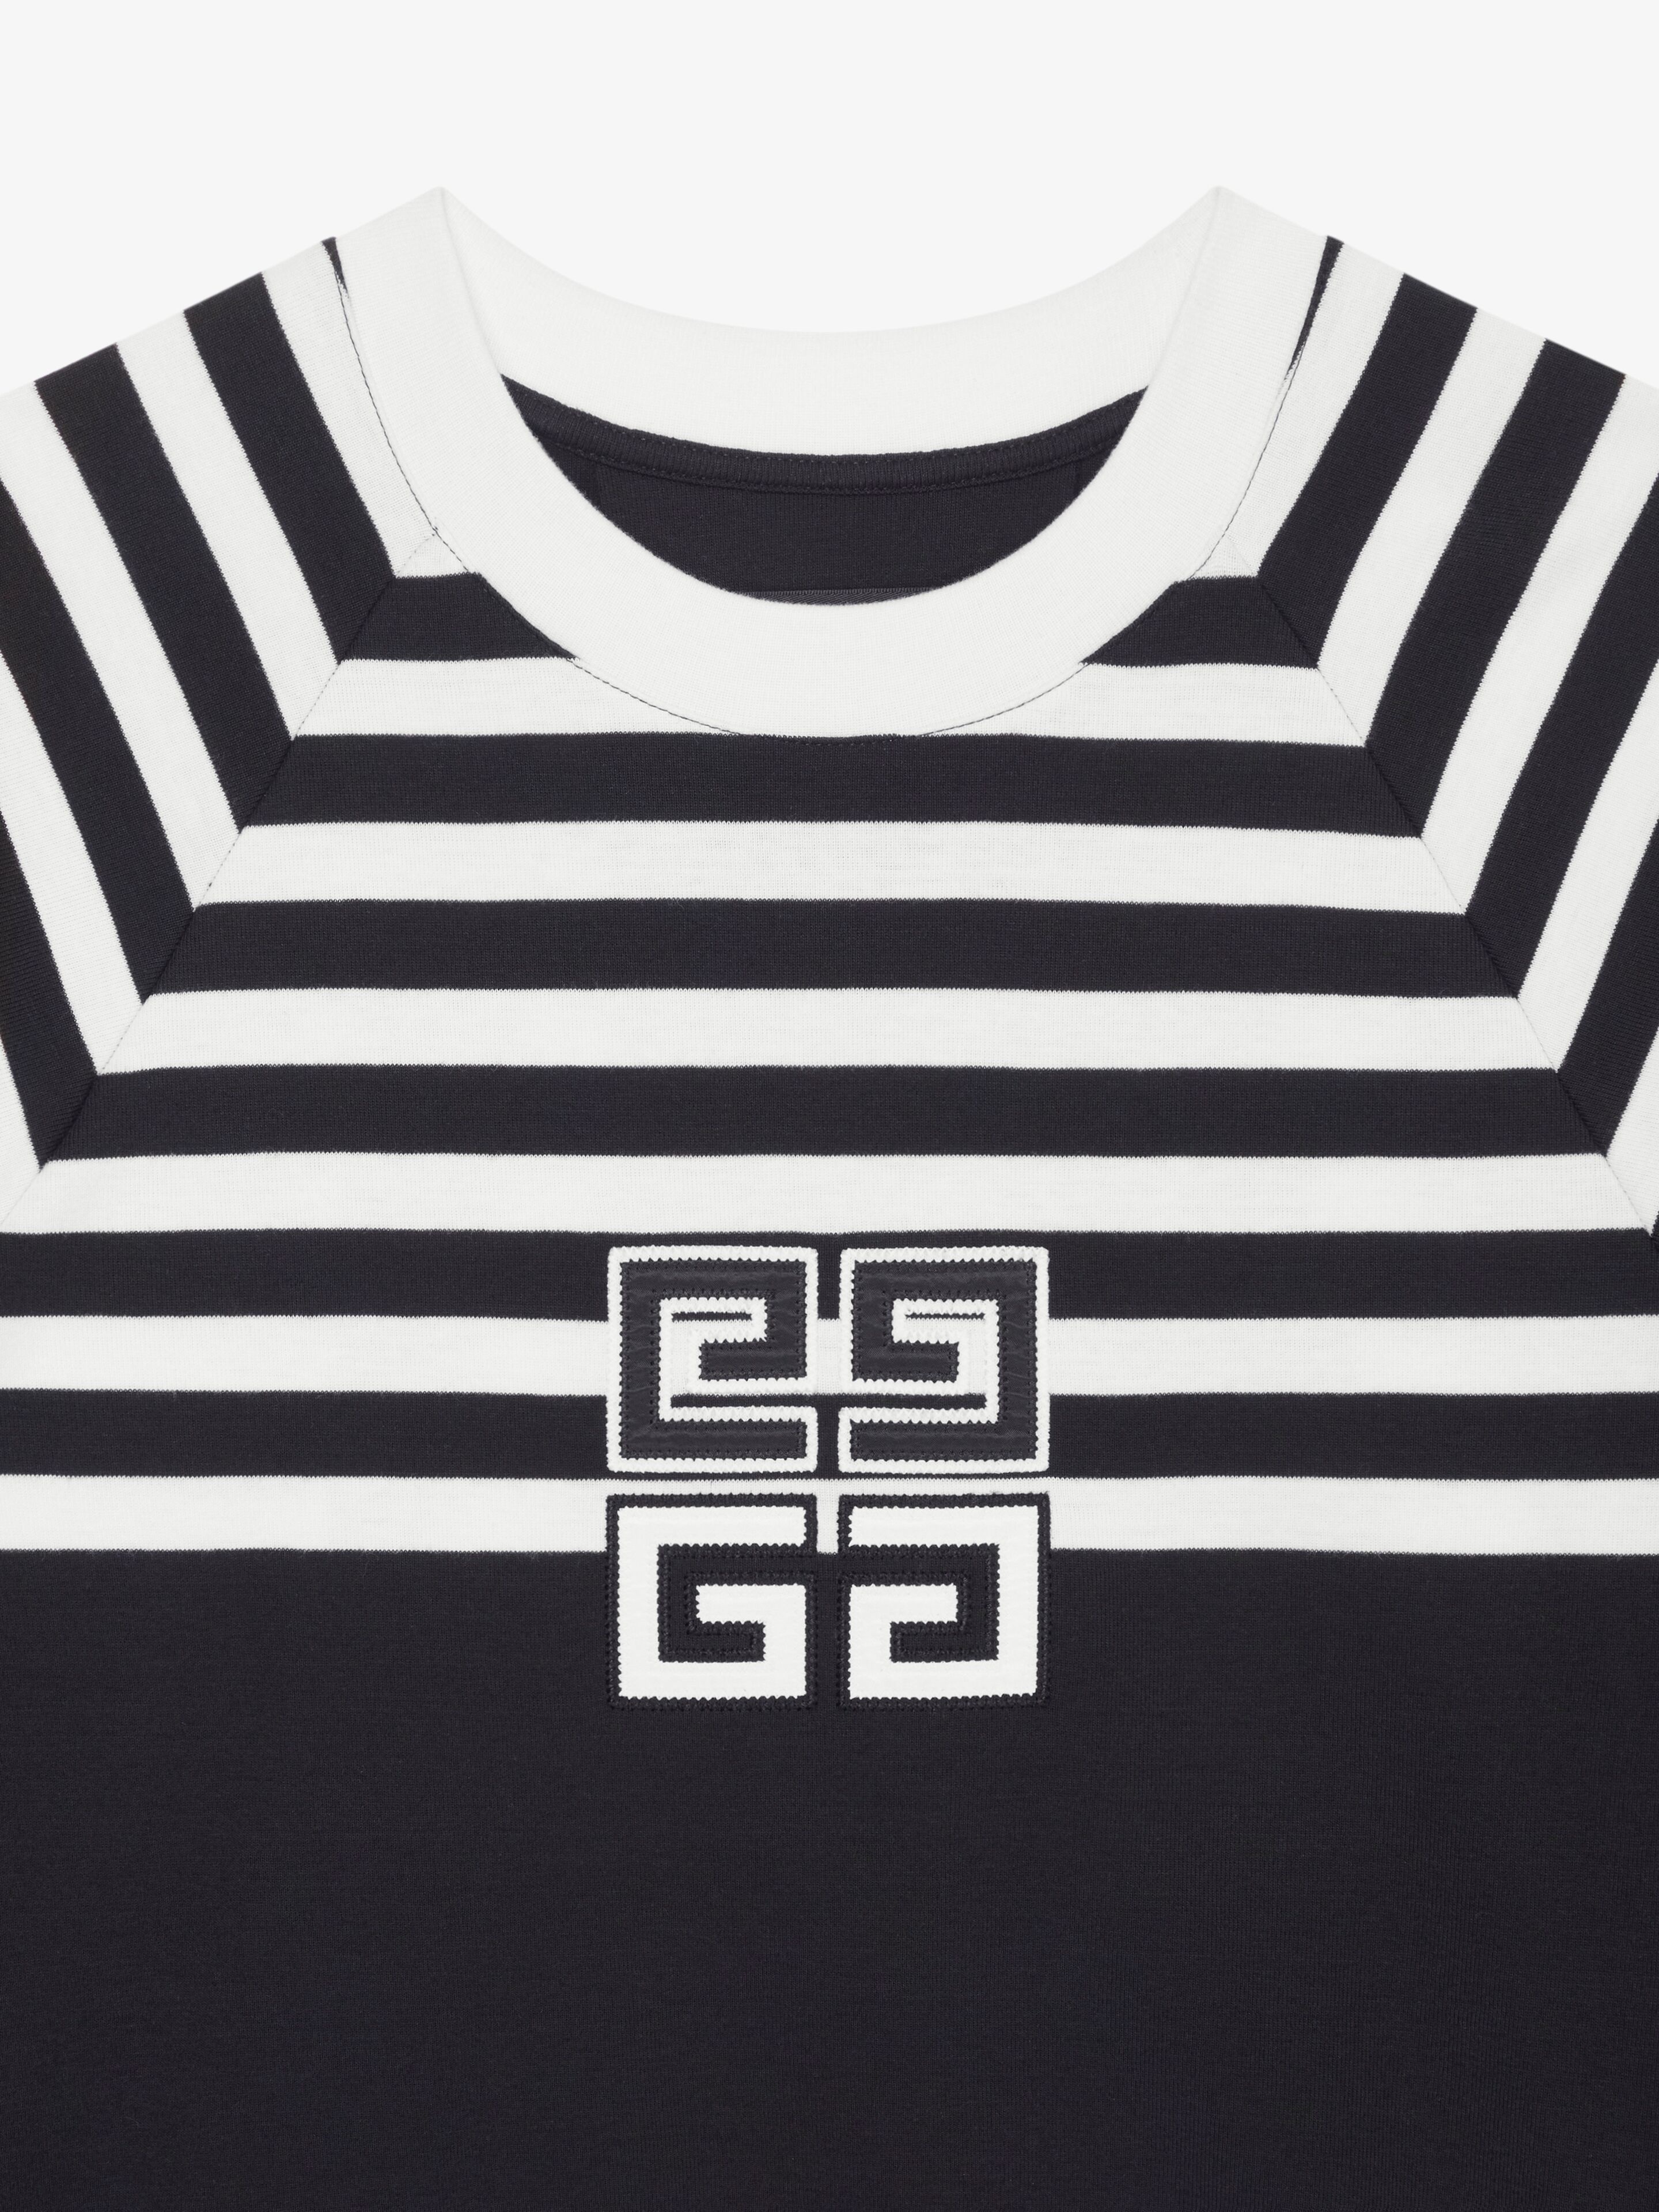 4G SWEATSHIRT IN JERSEY WITH STRIPES - 5